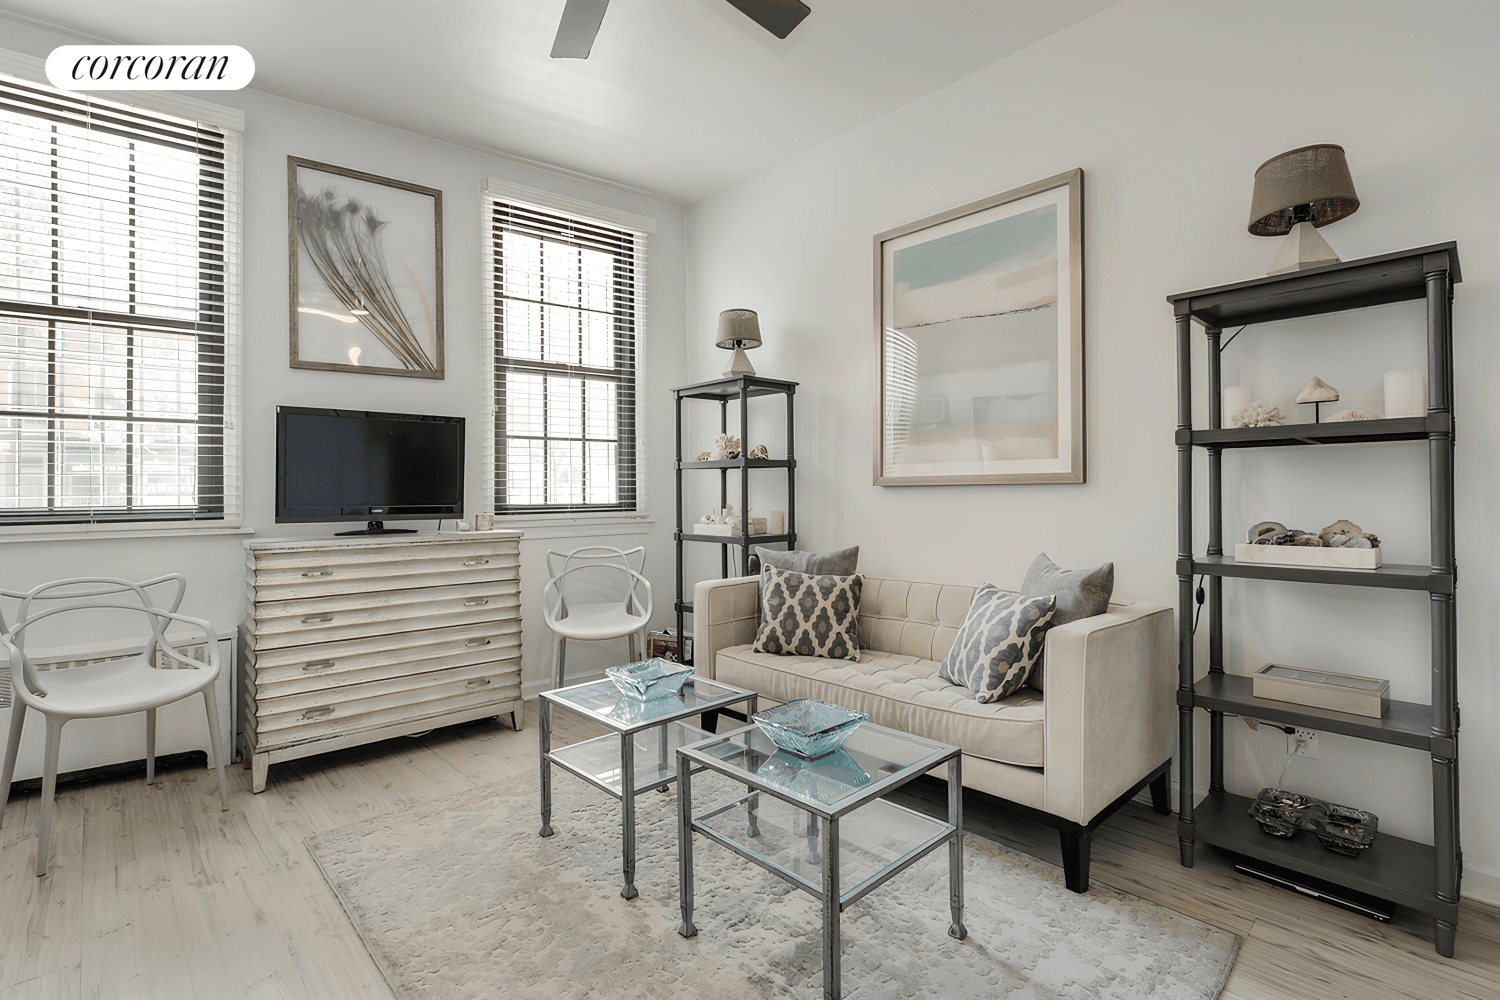 Located in the heart of the West Village, this beautiful ALCOVE studio boasts 3 over sized windows, high ceilings and excellent natural light.